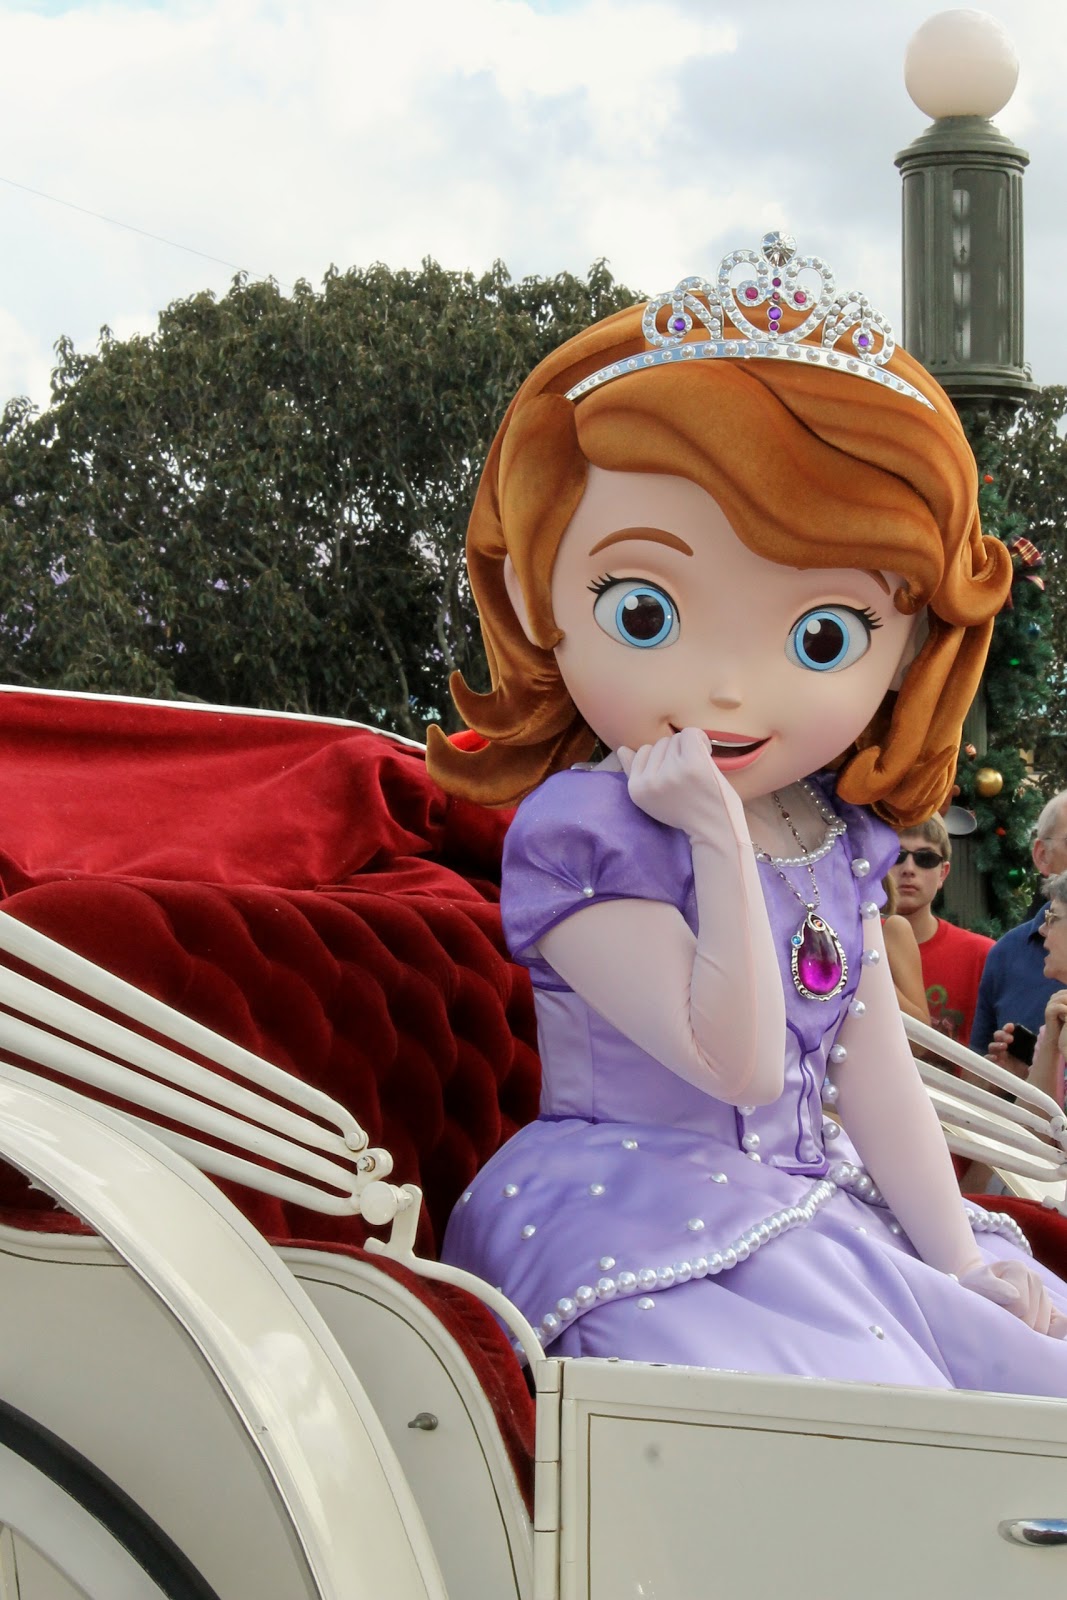 Unofficial Disney Character Hunting Guide: Sofia the First debuts at